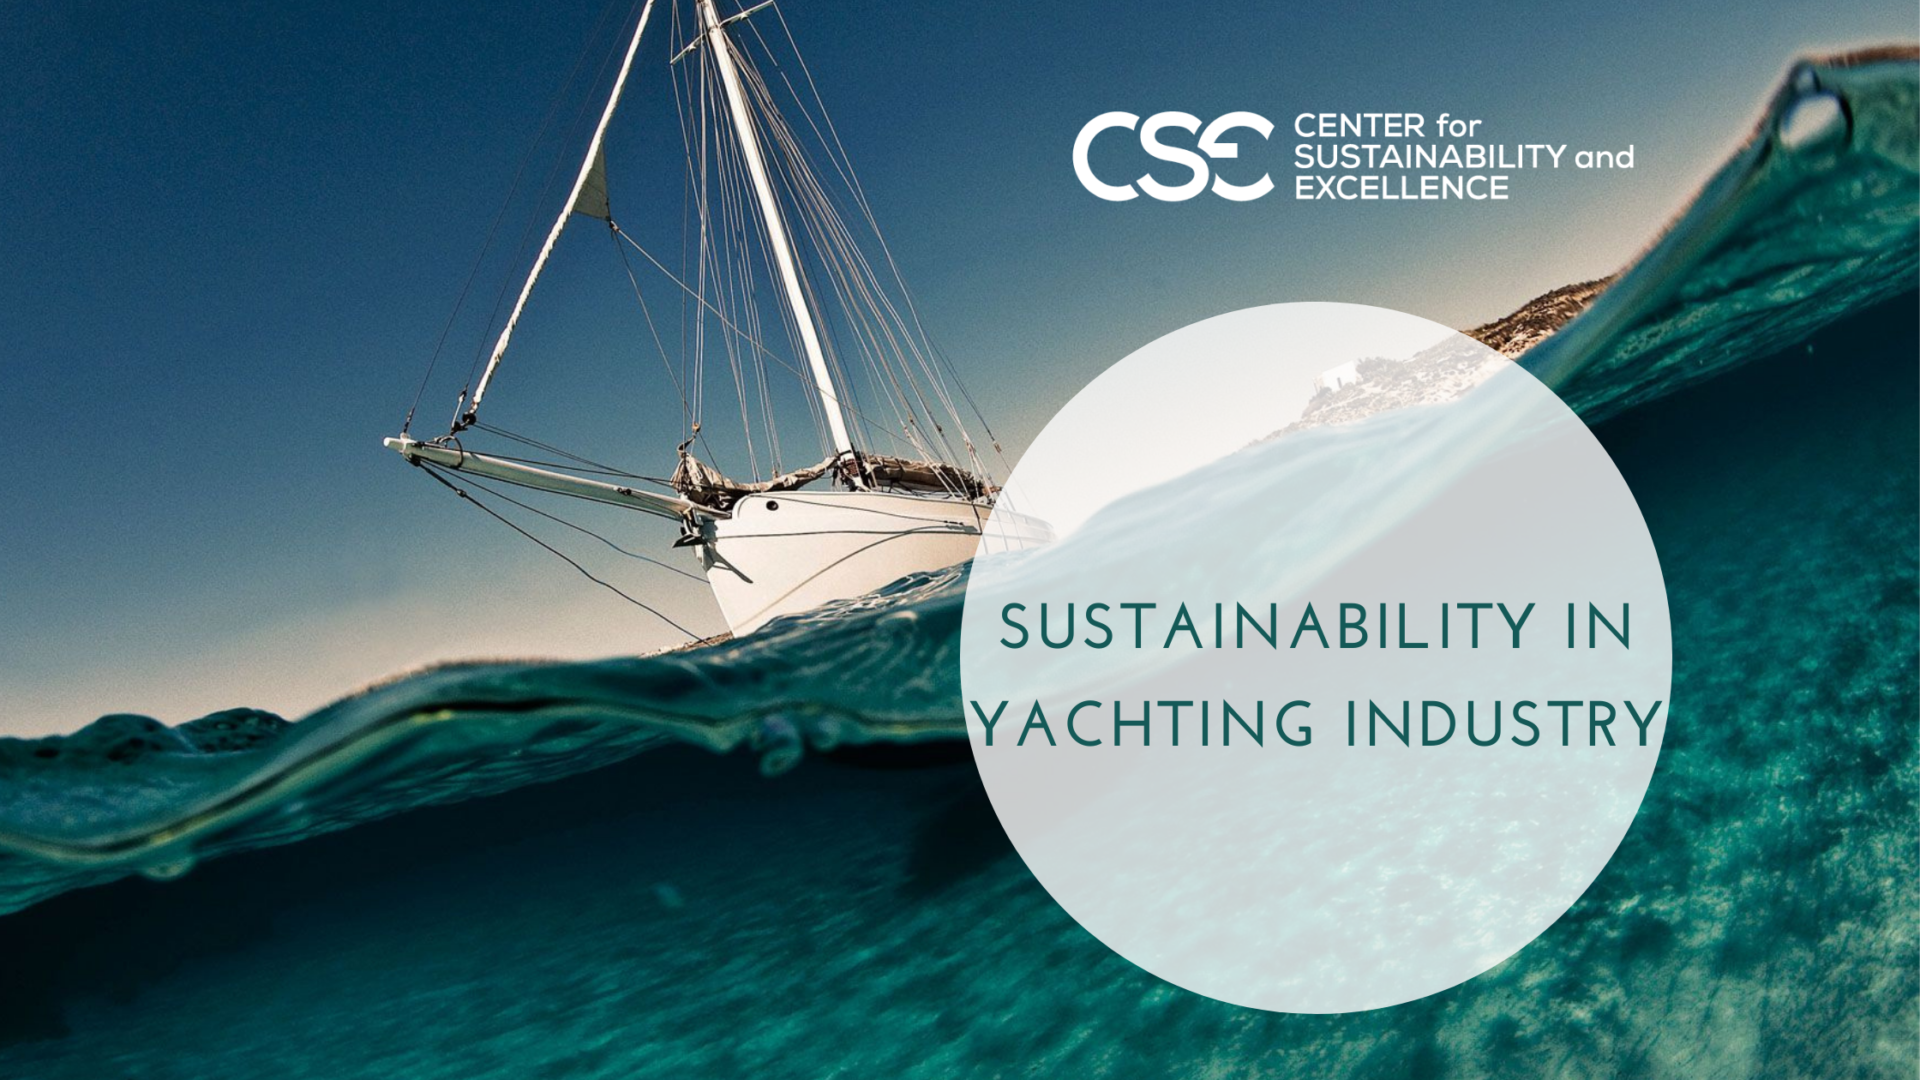 Two critical tools in applying Sustainability in Yachting: Materiality Assessment and Sustainability Reporting